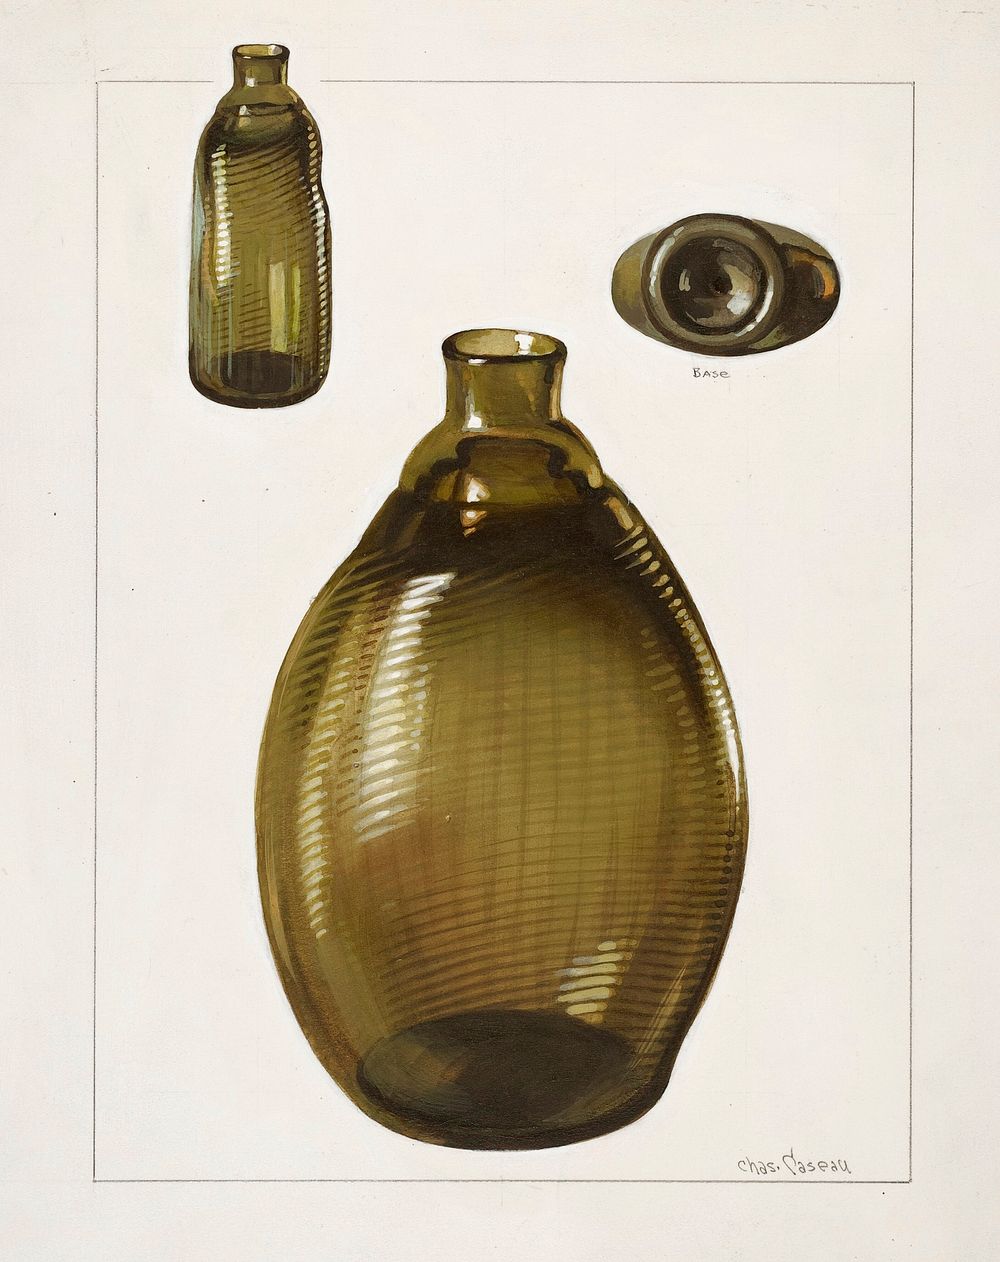 Flask (Pitkin Type) (ca. 1936) by Charles Caseau. Original from The National Gallery of Art. Digitally enhanced by rawpixel.